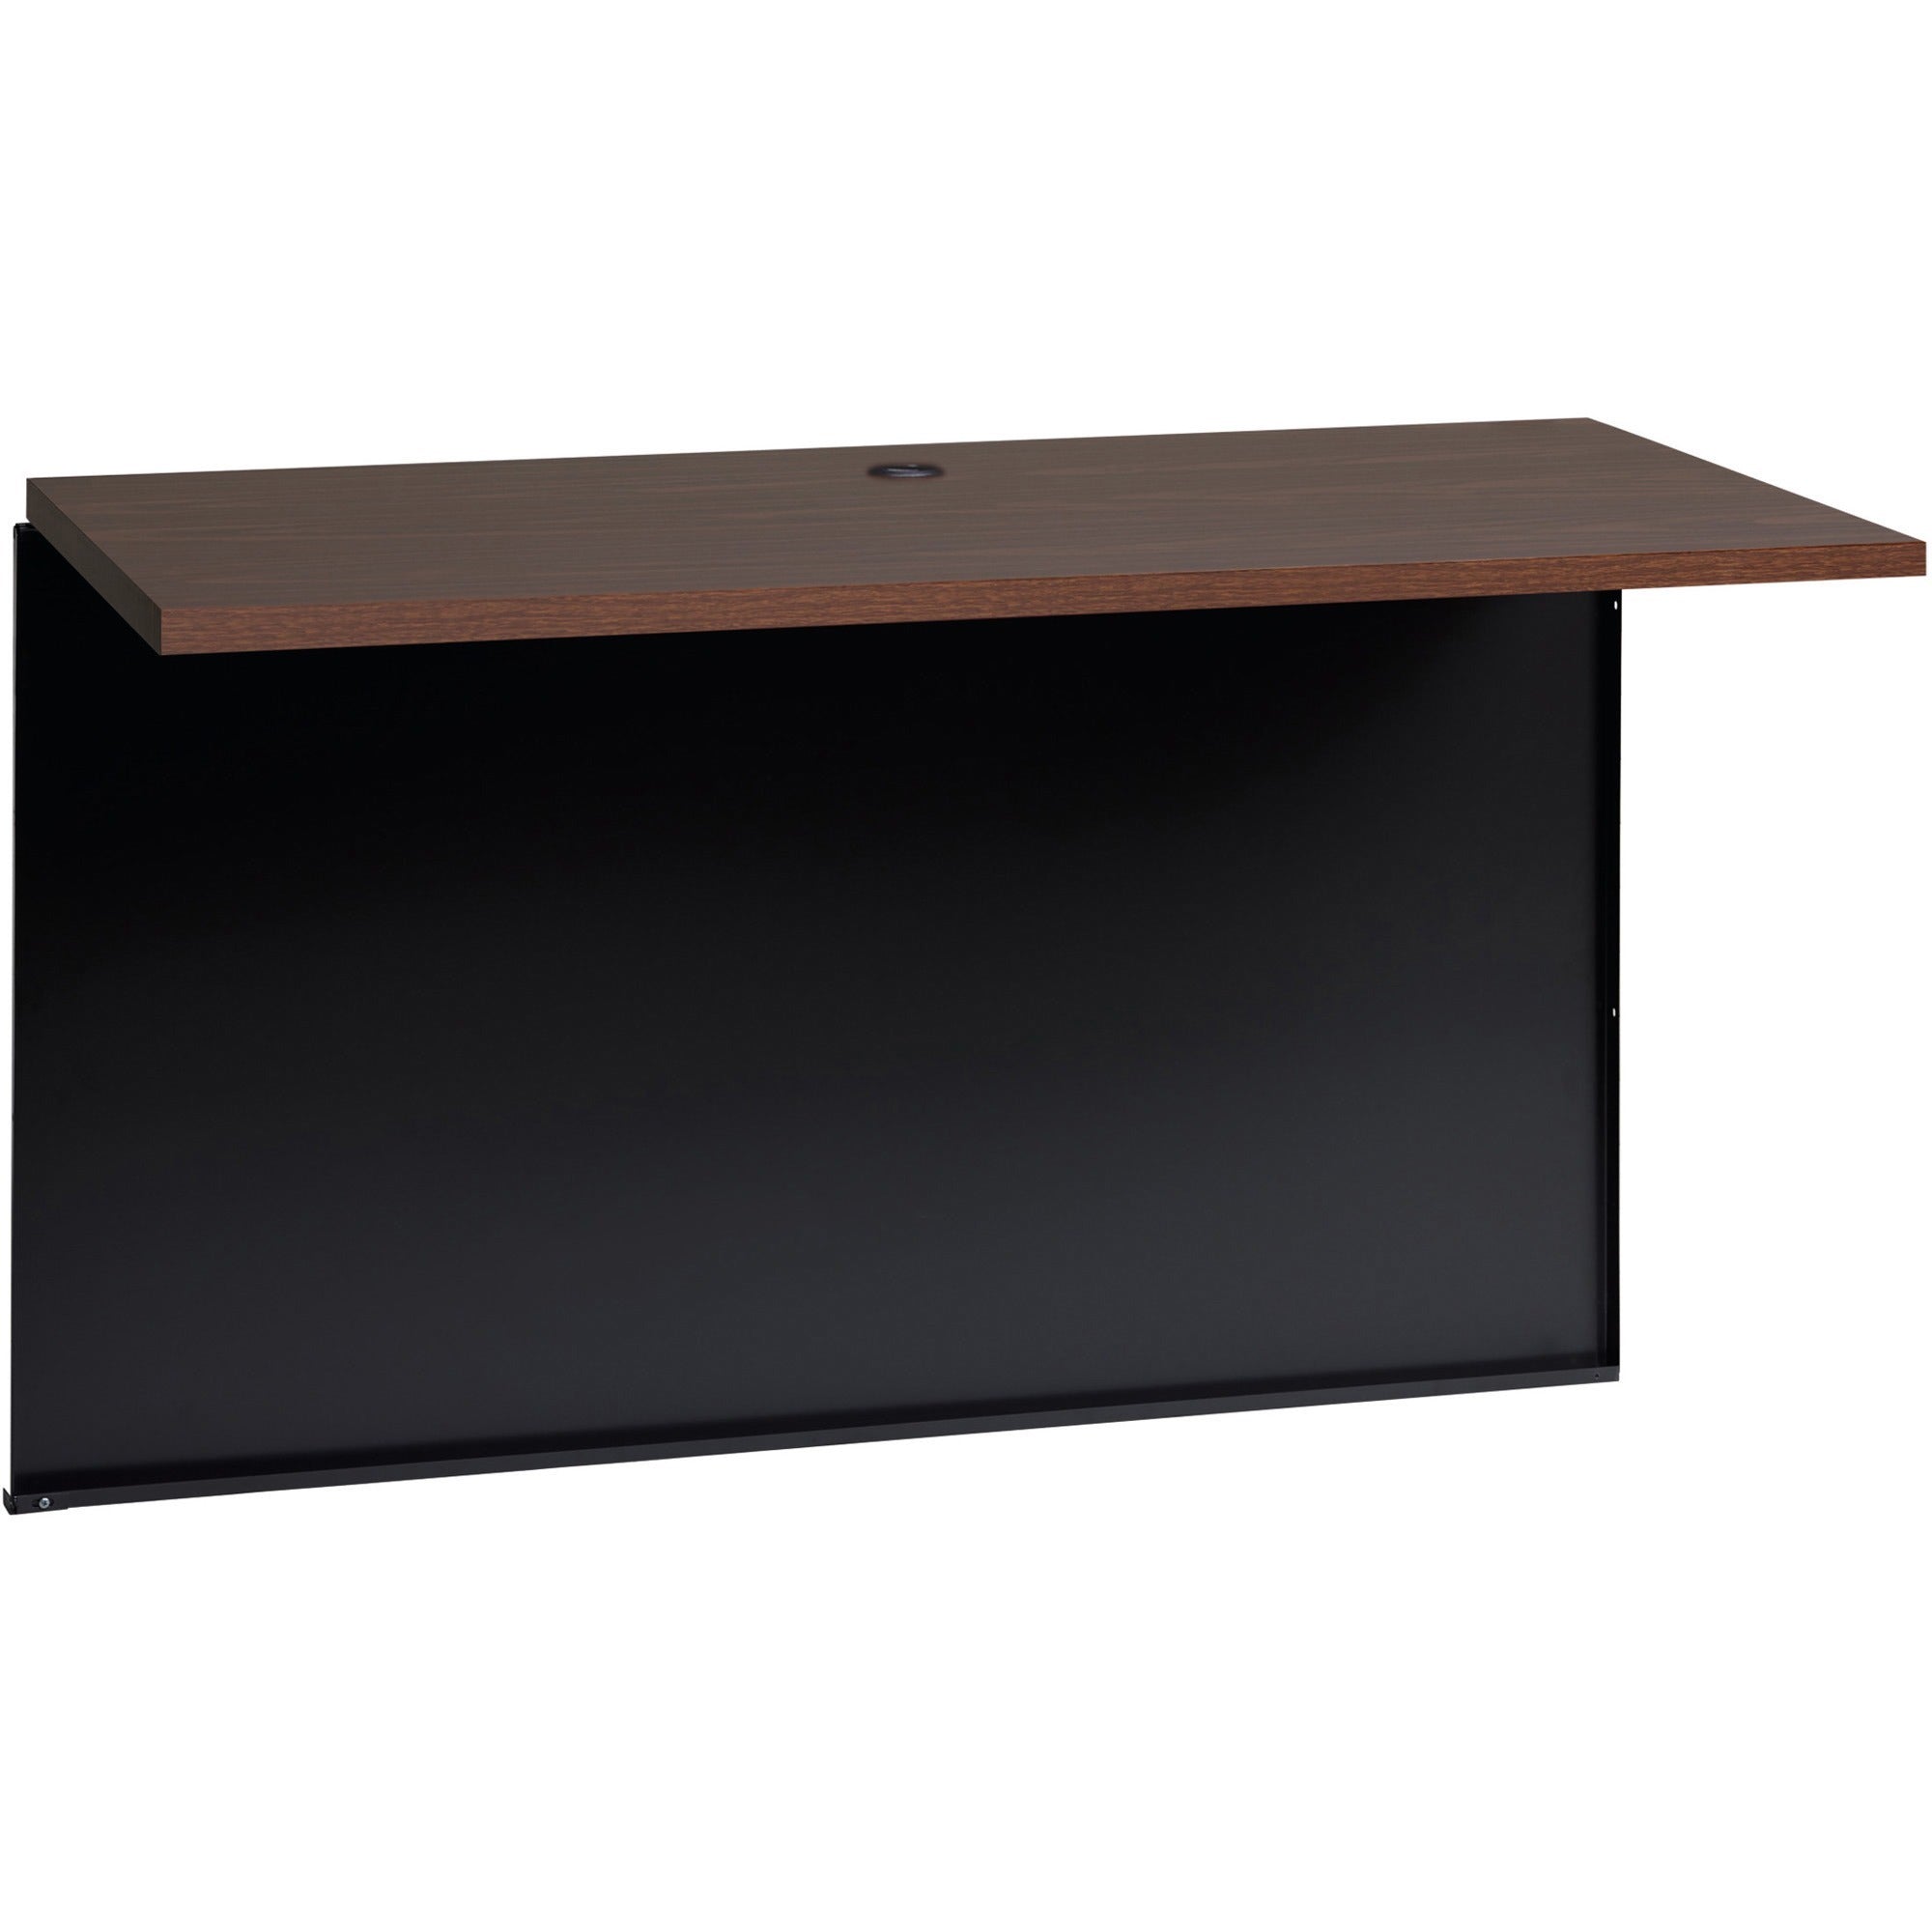 Lorell Fortress Modular Series Bridge - 48" x 24" , 1.1" Top - Material: Steel - Finish: Walnut Laminate, Black - Scratch Resistant, Stain Resistant, Ball-bearing Suspension, Grommet, Handle, Cord Management - 